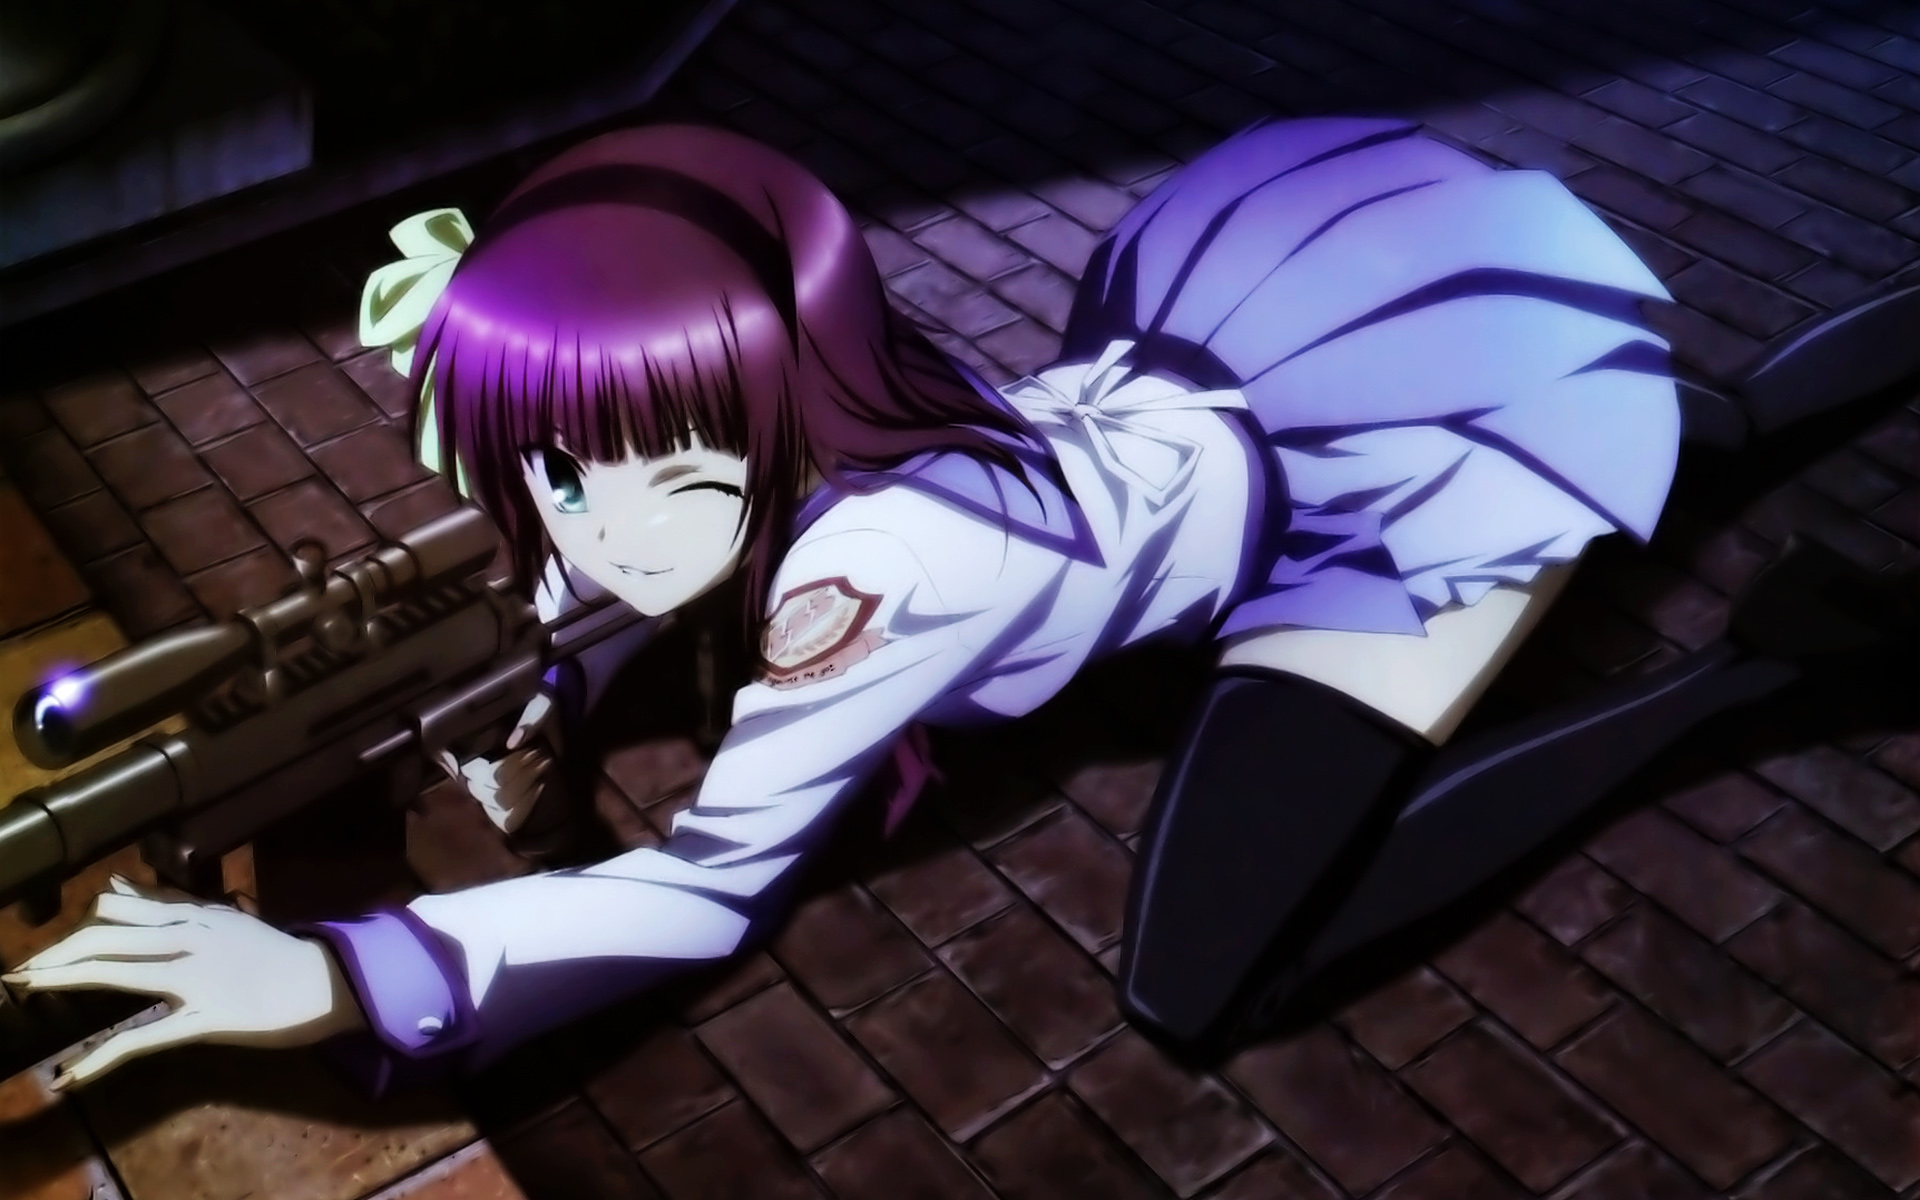 Yuri Nakamura with a rifle and a smile, wearing a skirt, thigh highs, and headband.